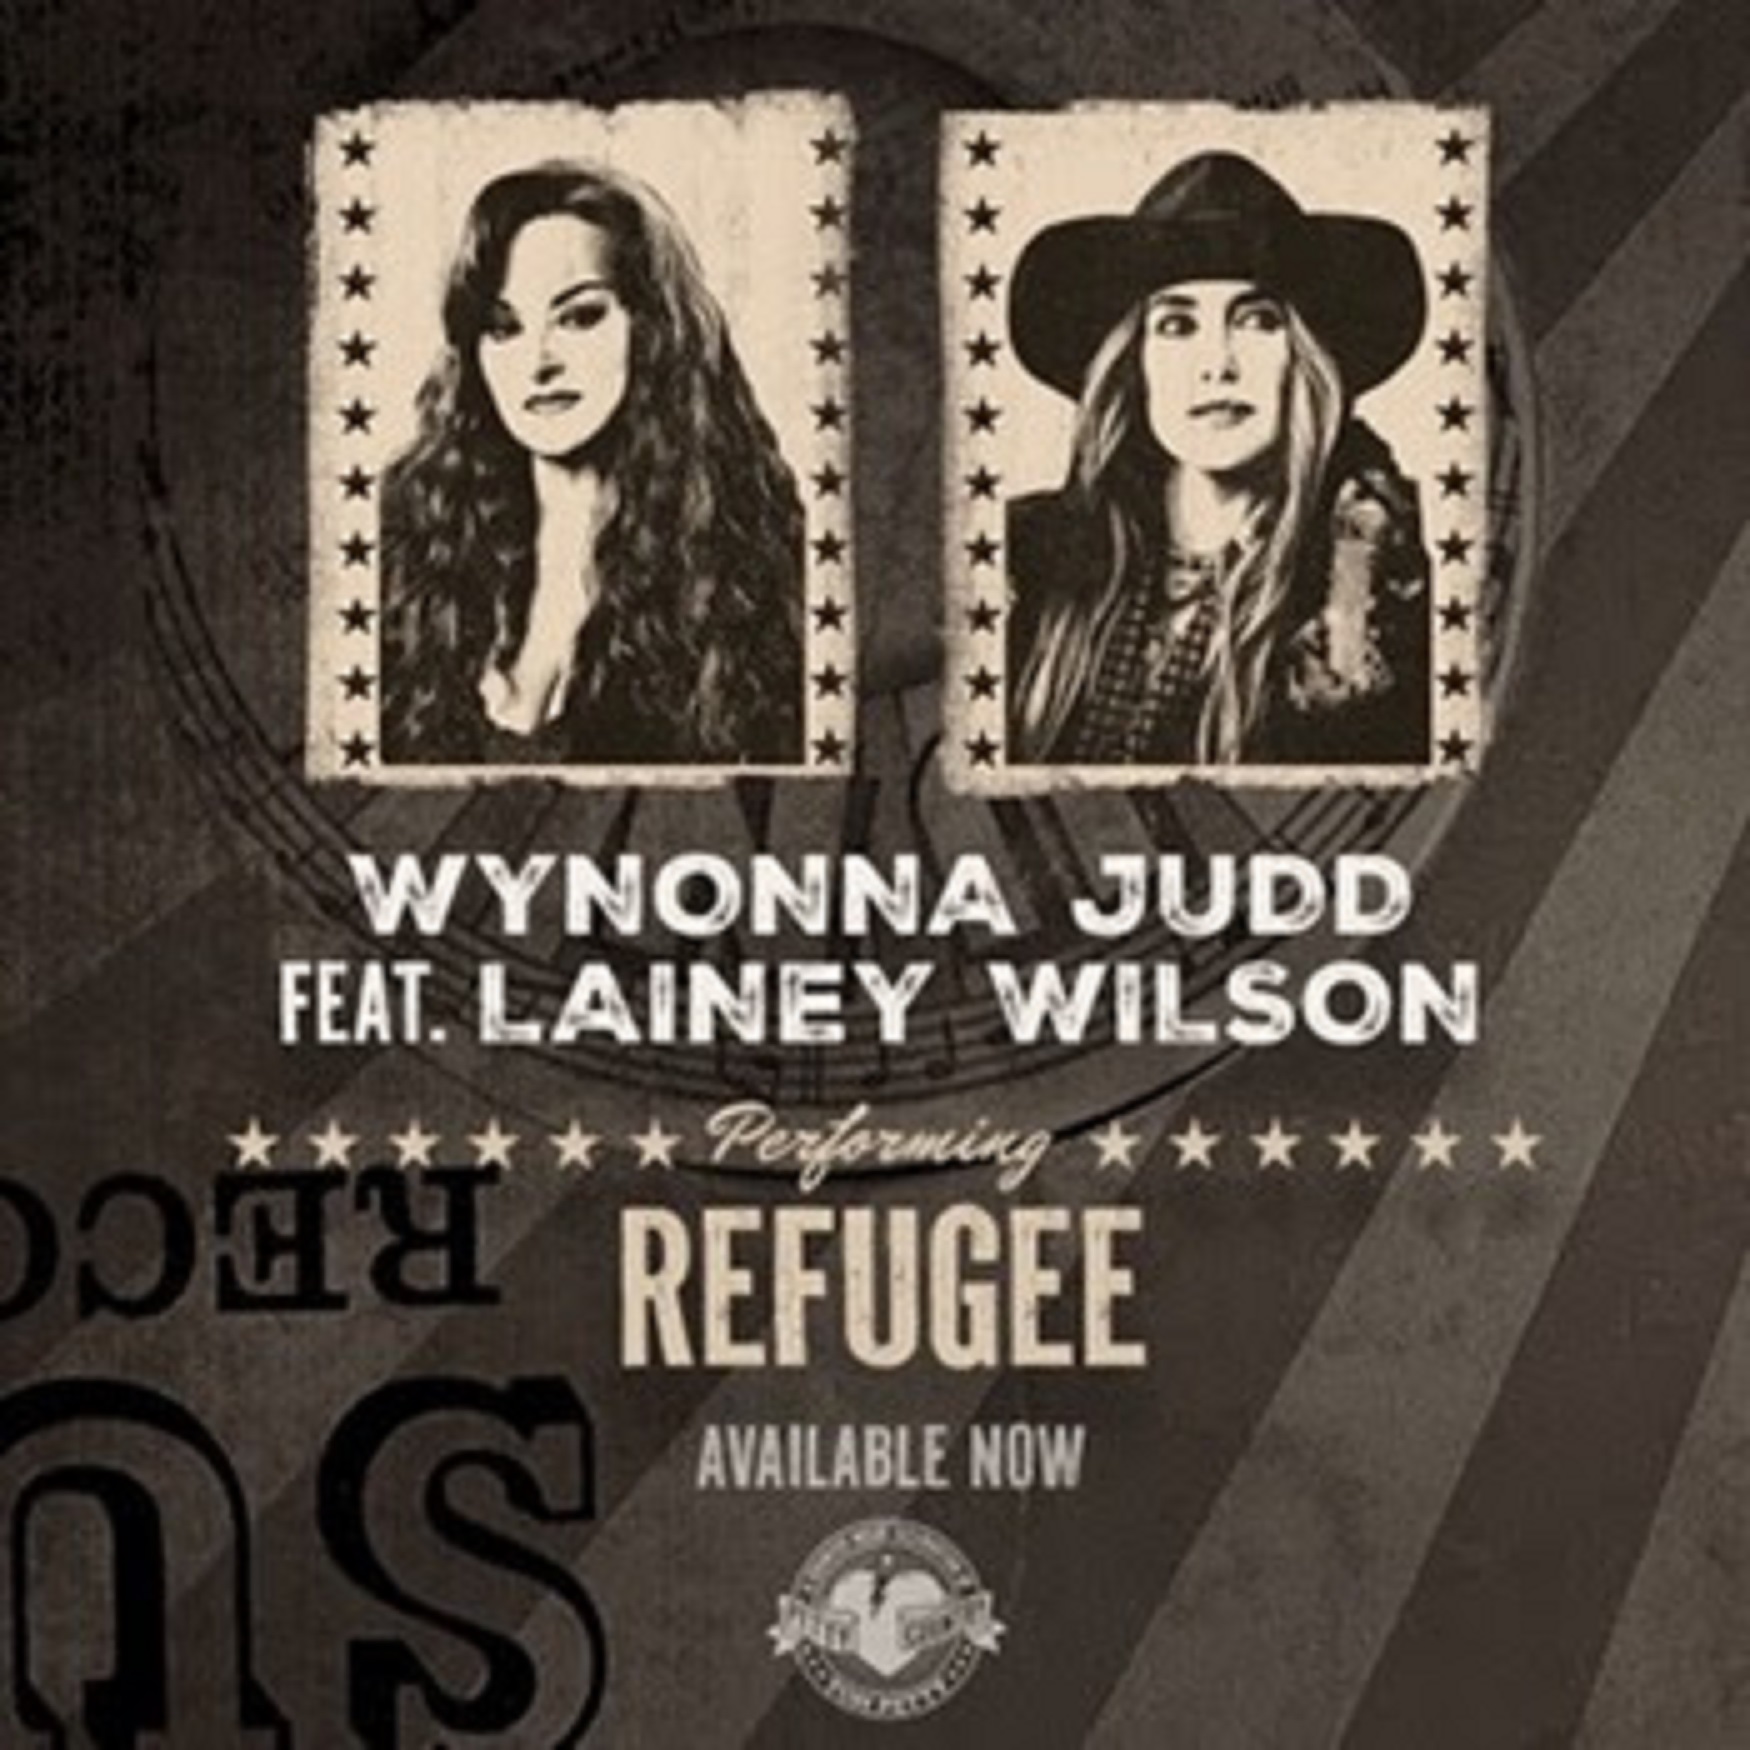 WYNONNA JUDD’S TAKE ON TOM PETTY AND THE HEARTBREAKERS’ CLASSIC “REFUGEE” FEATURING LAINEY WILSON DEBUTS TODAY WITH A NEW VIDEO